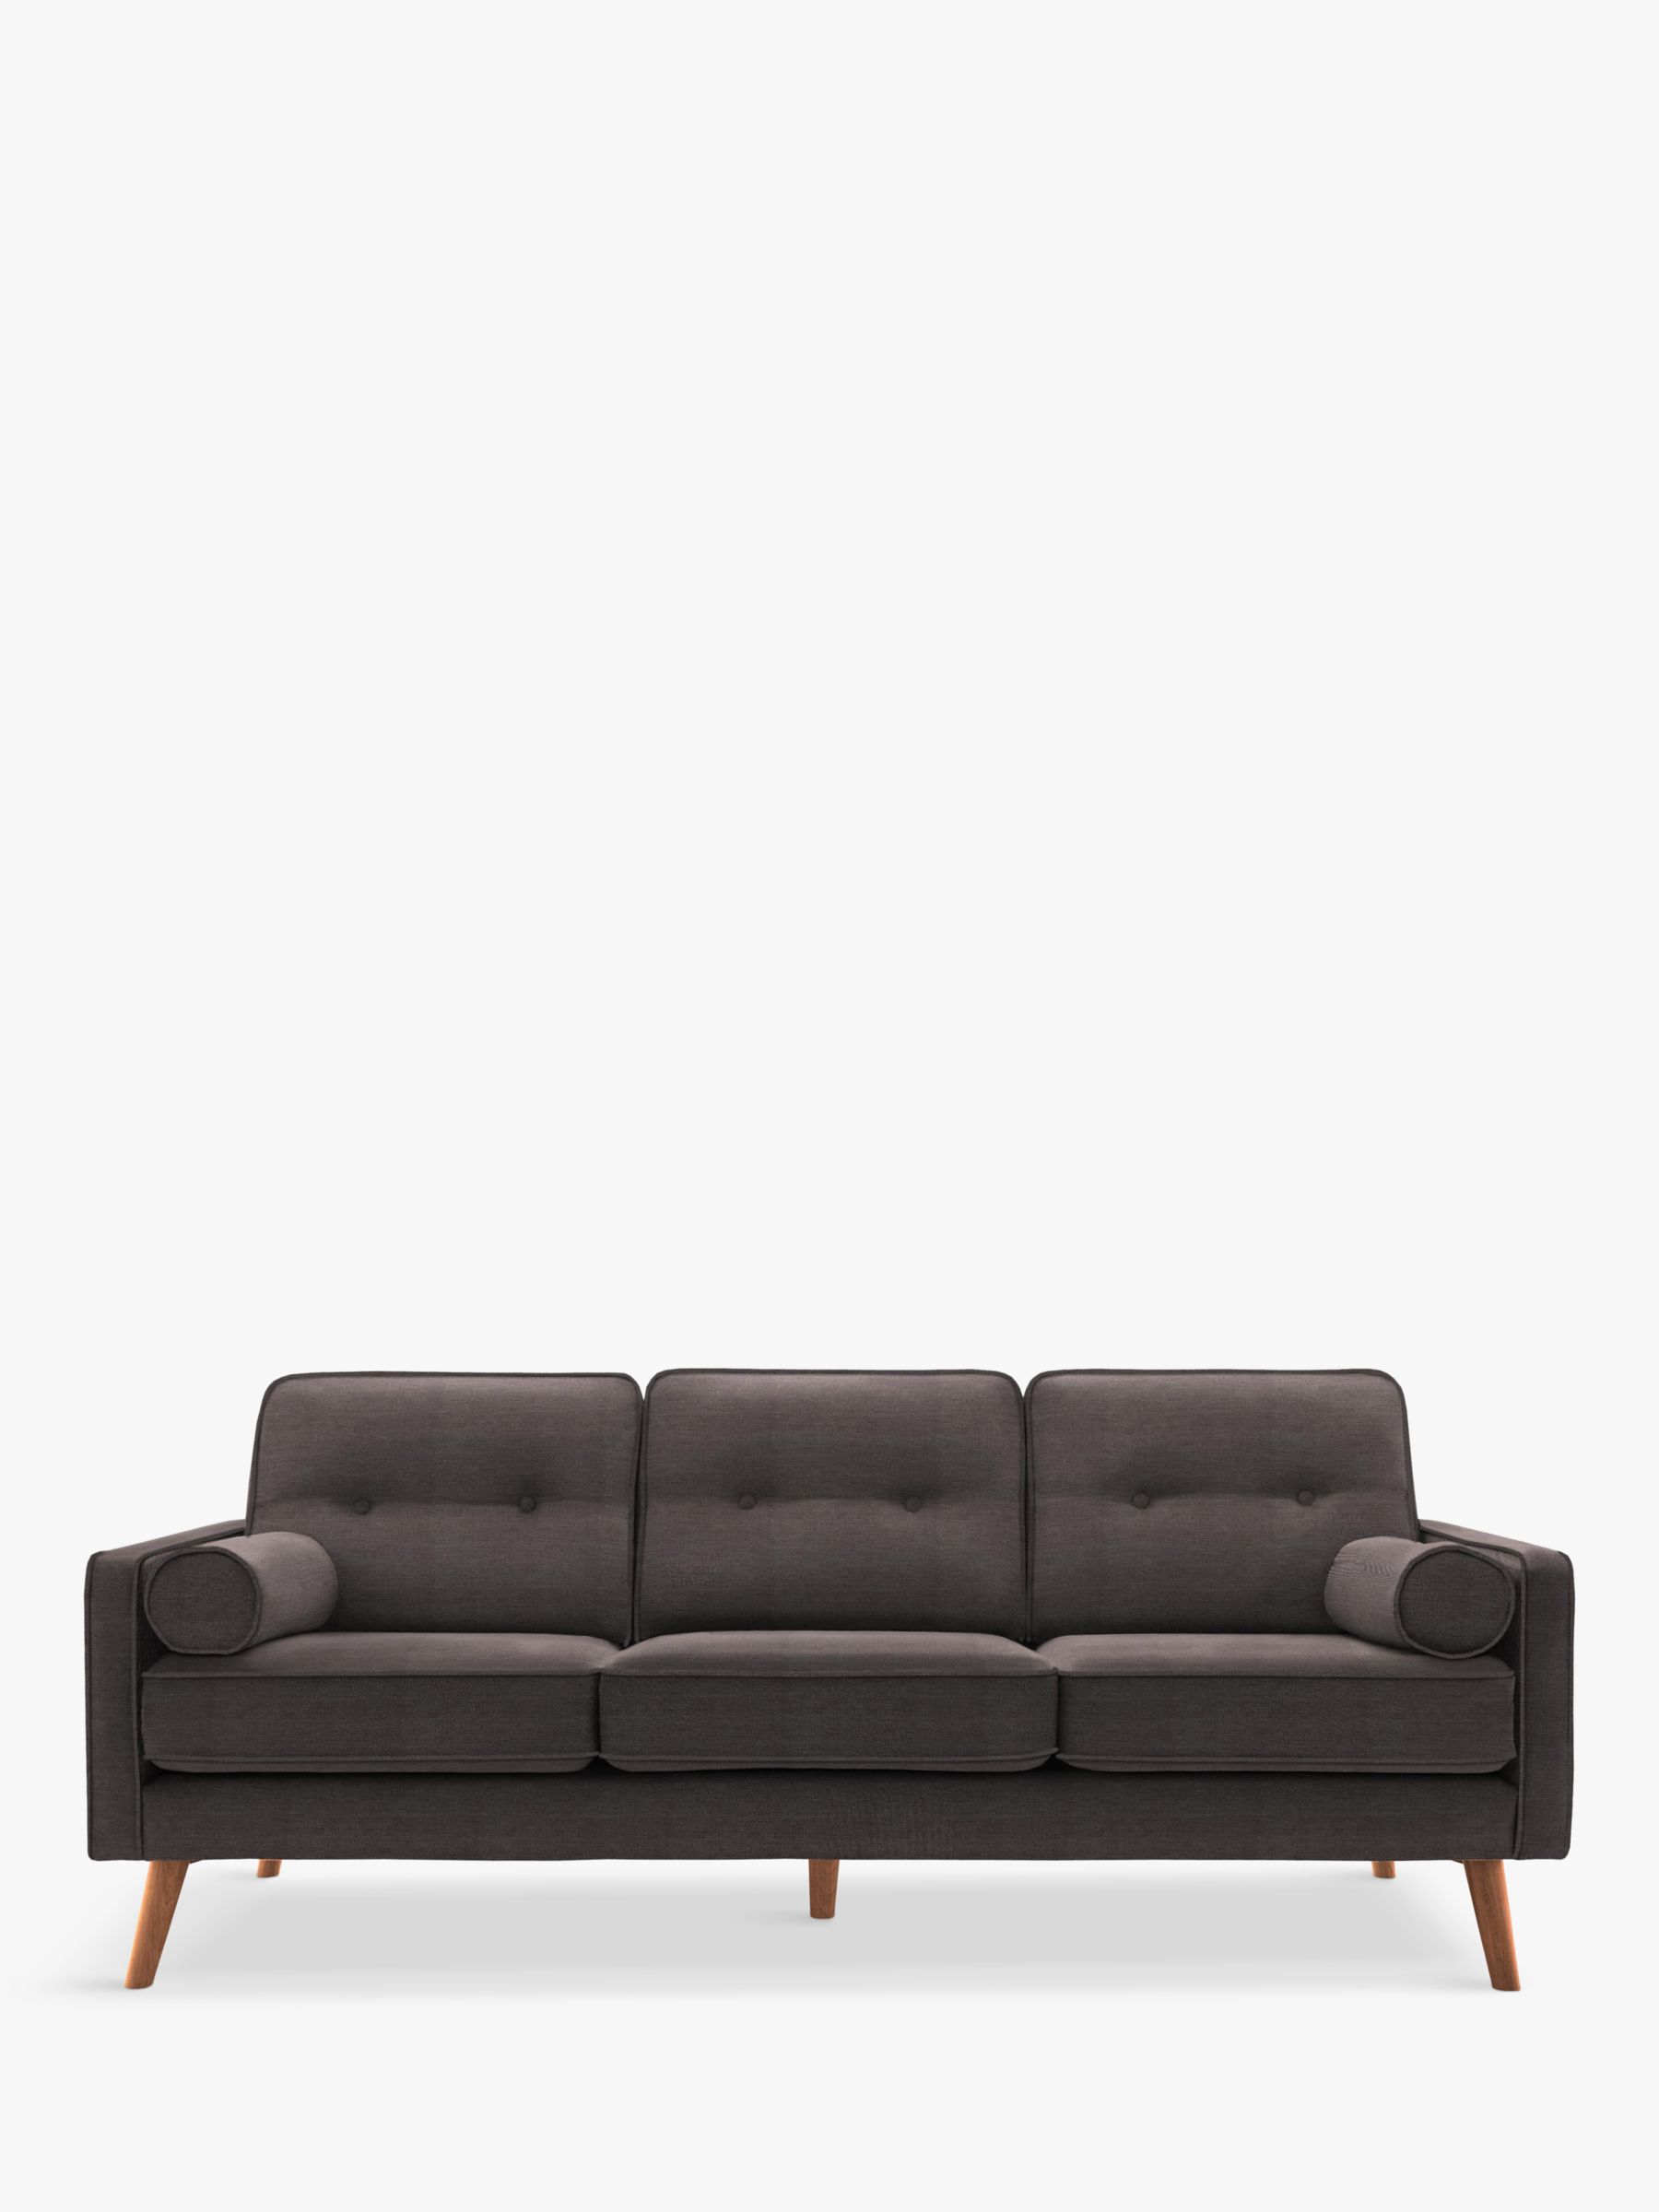 The Sixty Five Range, G Plan Vintage The Sixty Five Large 3 Seater Sofa, Tonic Charcoal